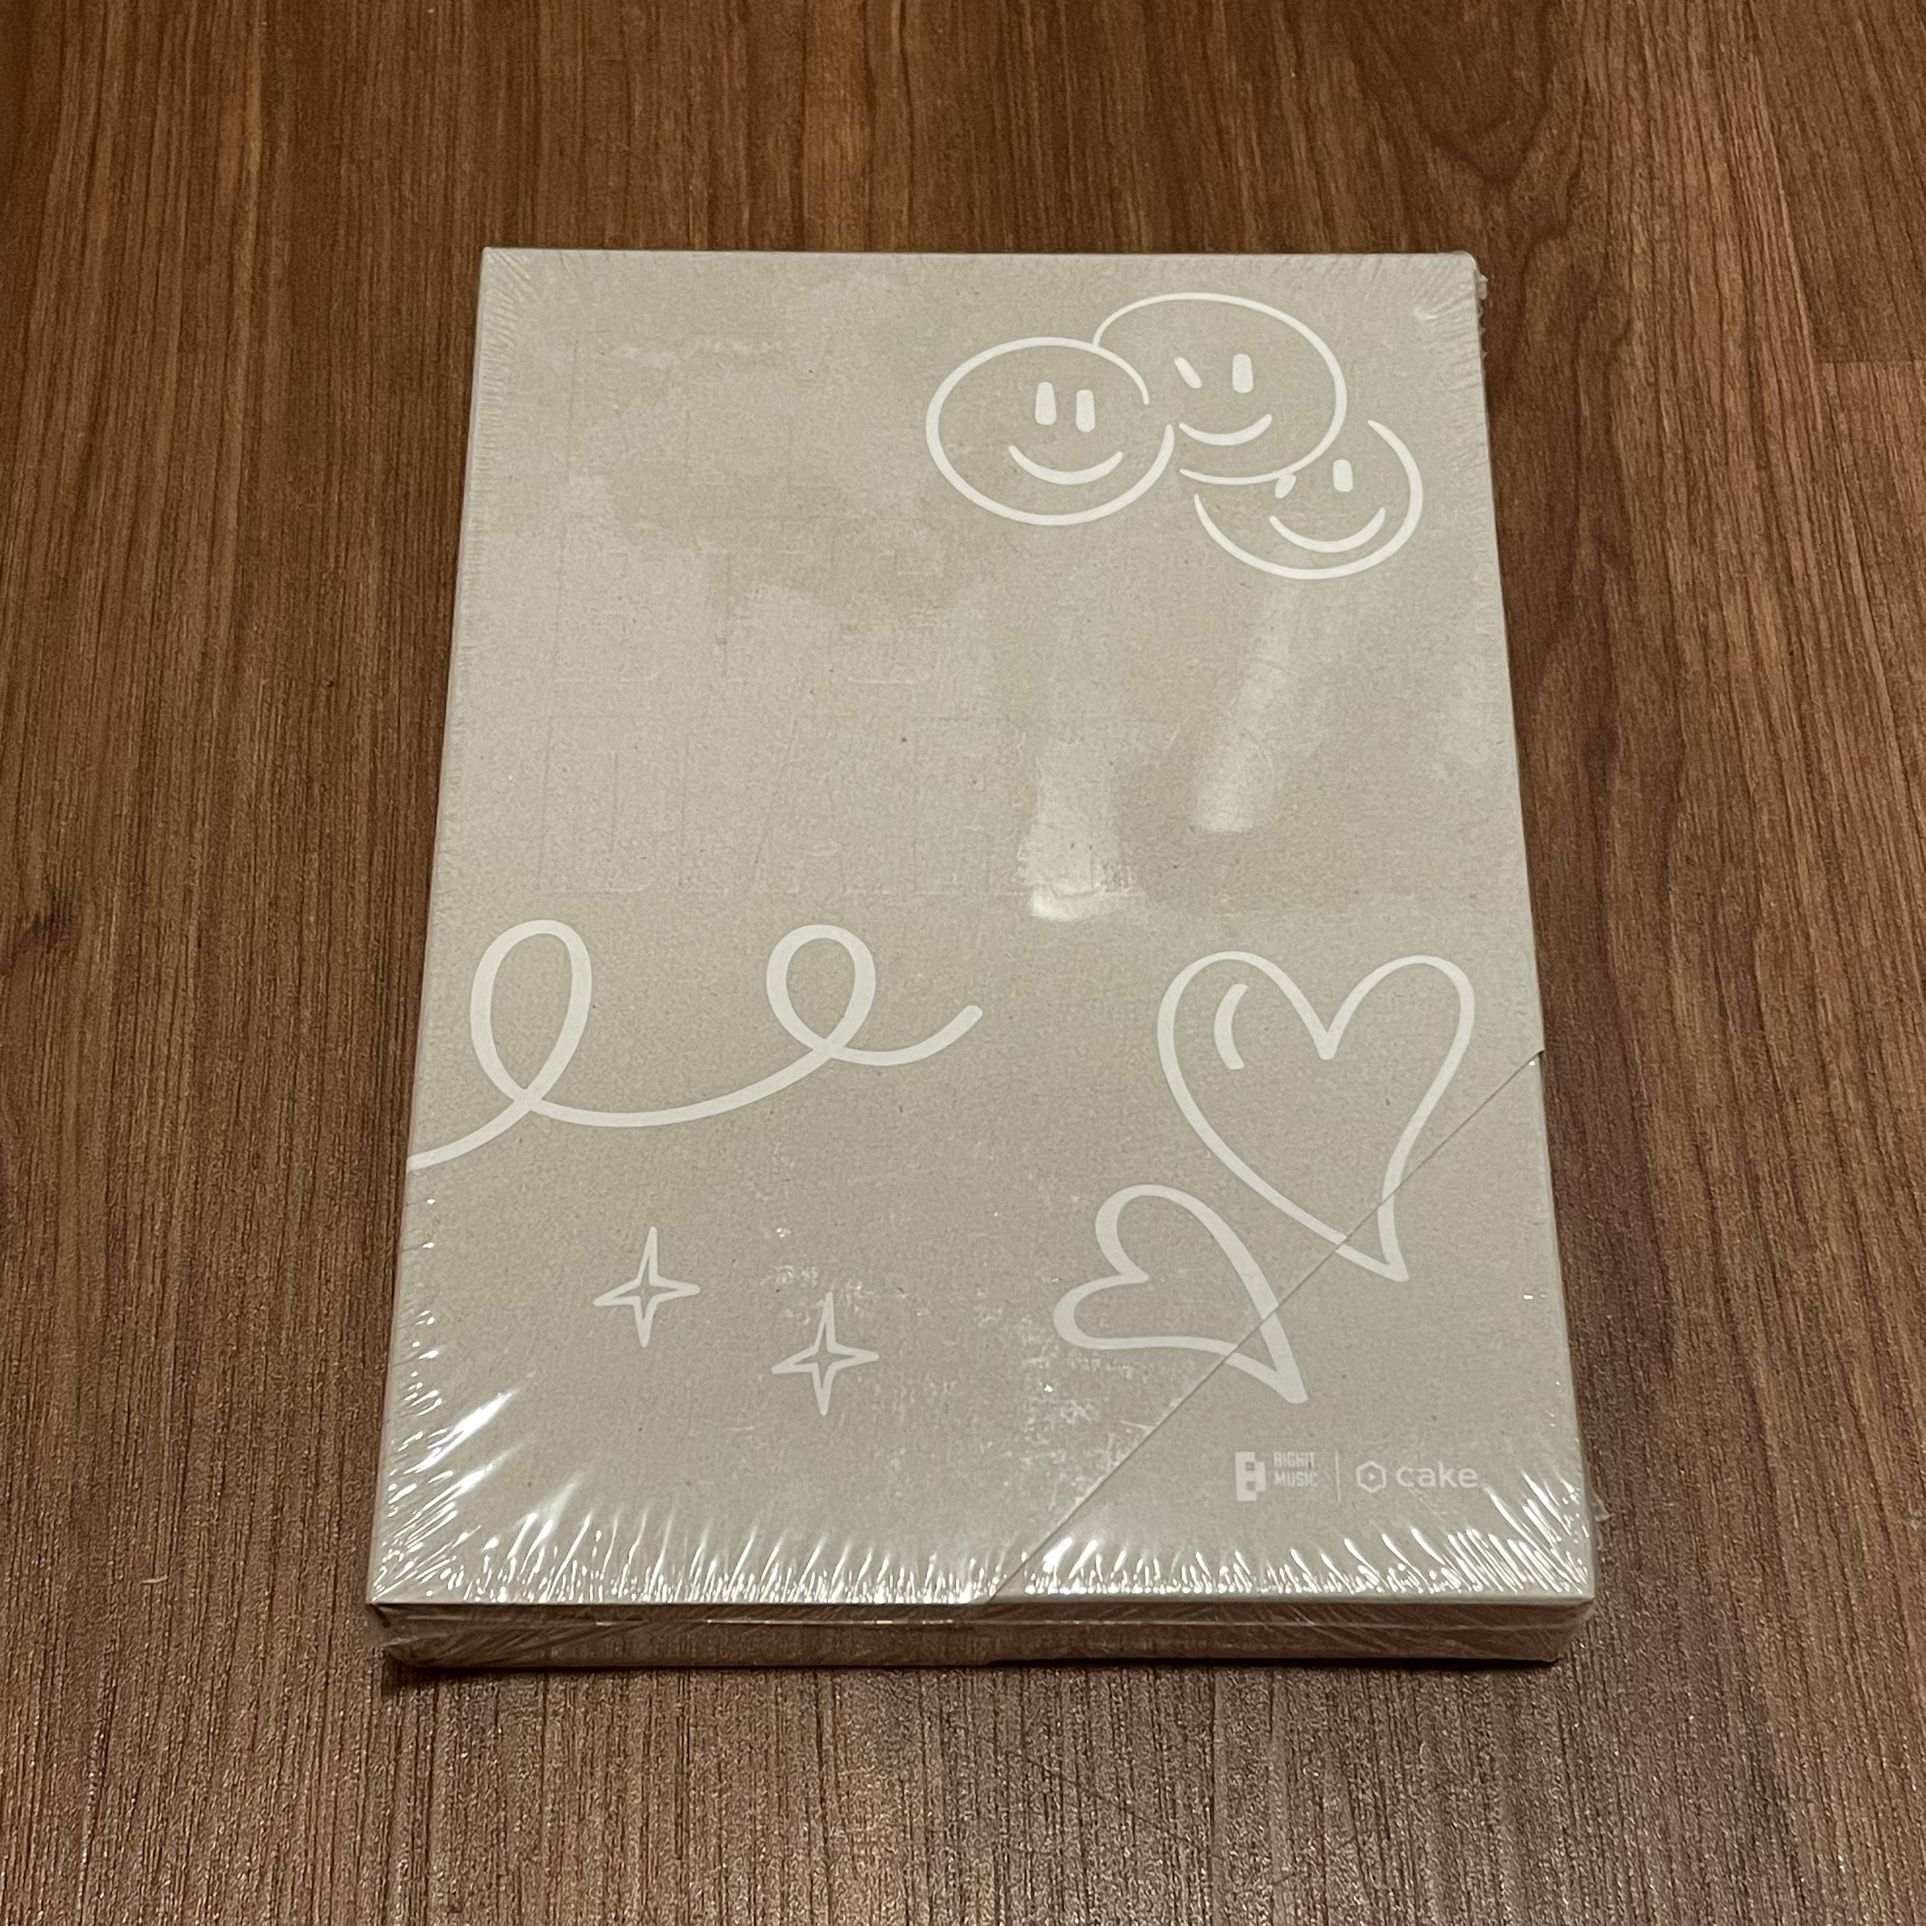 KPOP - Official My BTS Diary - Brand New - Sealed 